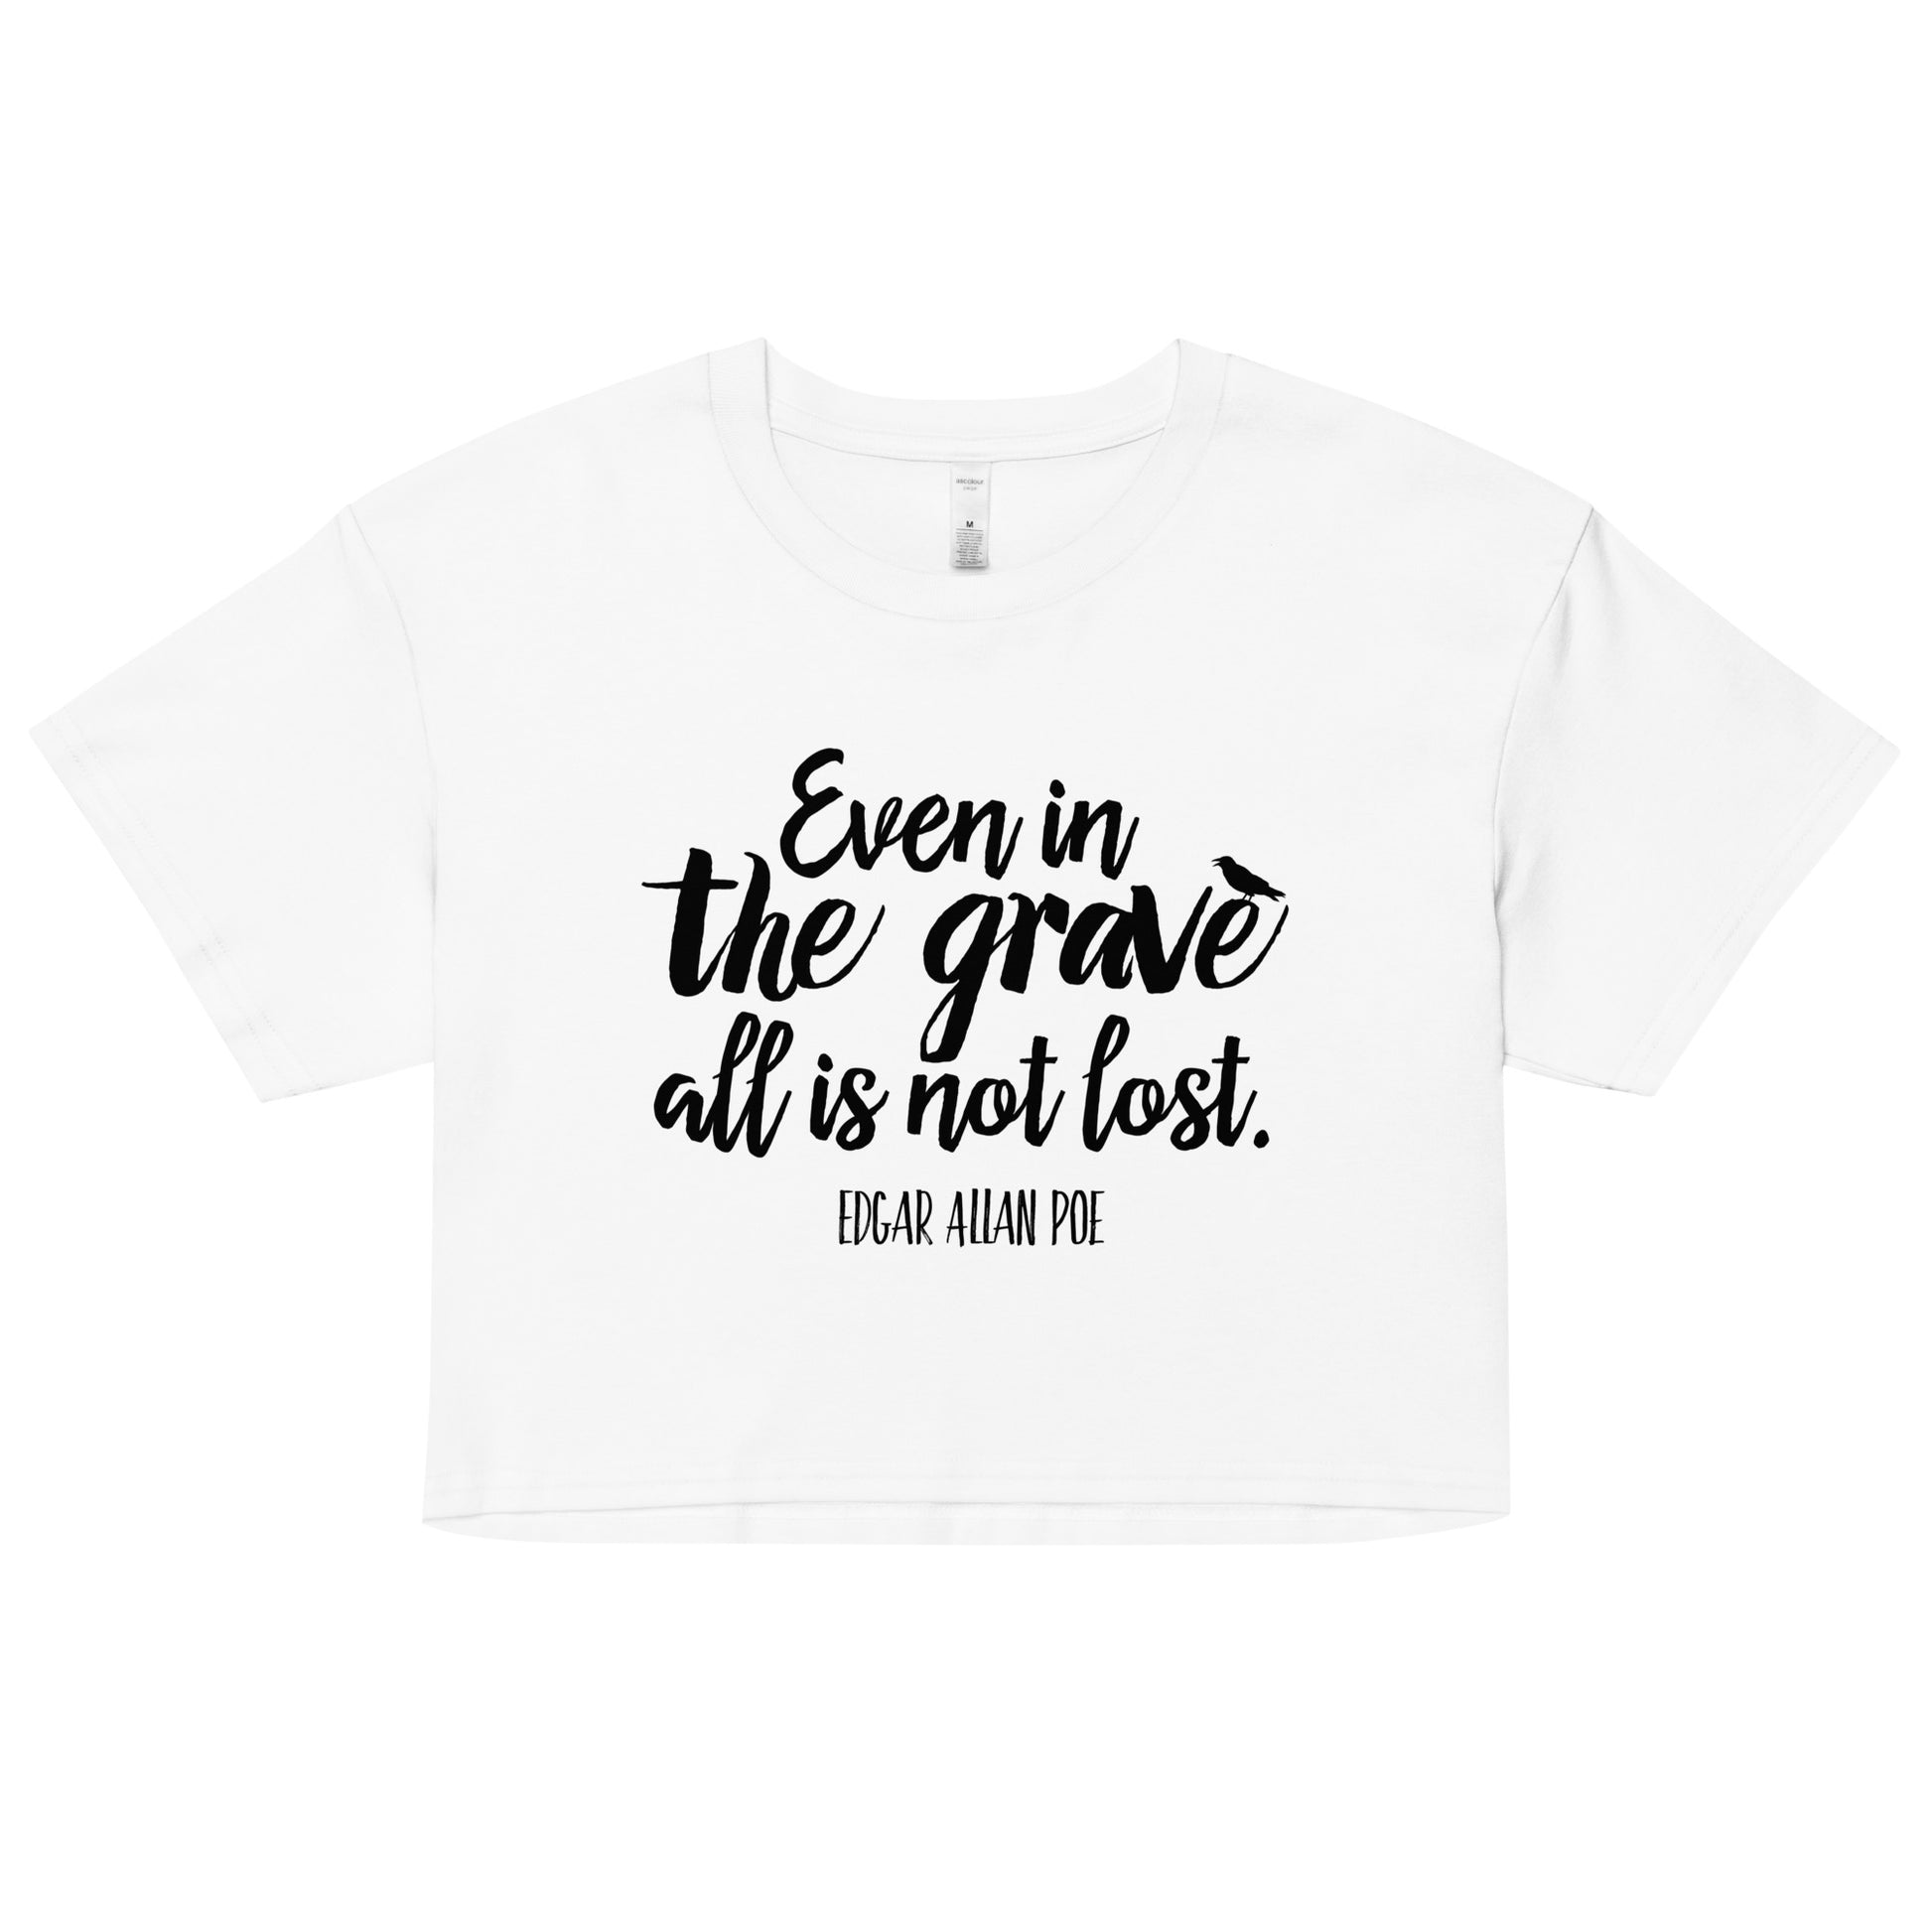 Even in the Grave Edgar Allan Poe Quote - Women’s crop top - White Front